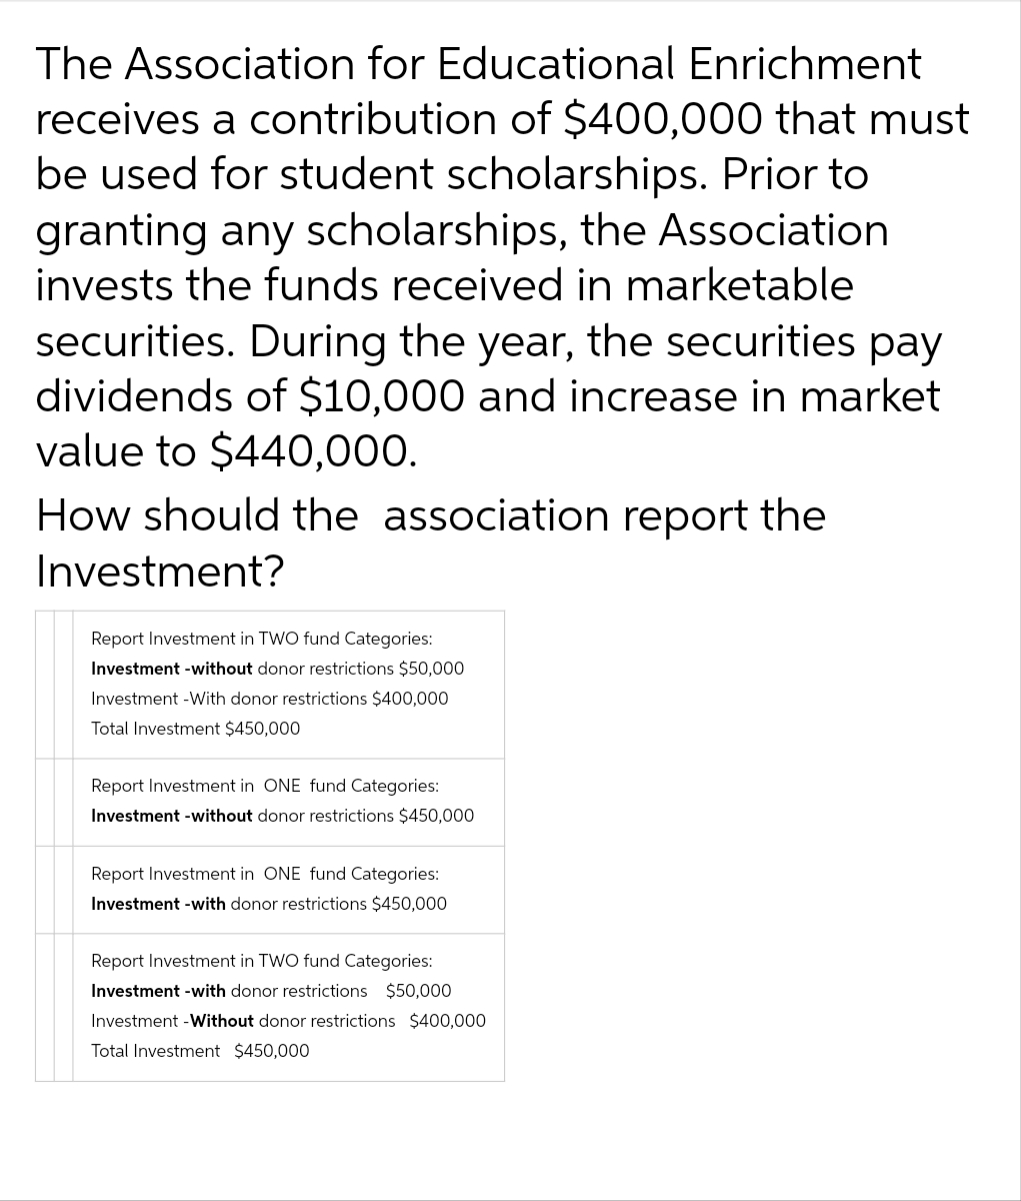 The Association for Educational Enrichment
receives a contribution of $400,000 that must
be used for student scholarships. Prior to
granting any scholarships, the Association
invests the funds received in marketable
securities. During the year, the securities pay
dividends of $10,000 and increase in market
value to $440,000.
How should the association report the
Investment?
Report Investment in TWO fund Categories:
Investment -without donor restrictions $50,000
Investment -With donor restrictions $400,000
Total Investment $450,000
Report Investment in ONE fund Categories:
Investment -without donor restrictions $450,000
Report Investment in ONE fund Categories:
Investment -with donor restrictions $450,000
Report Investment in TWO fund Categories:
Investment -with donor restrictions $50,000
Investment -Without donor restrictions $400,000
Total Investment $450,000